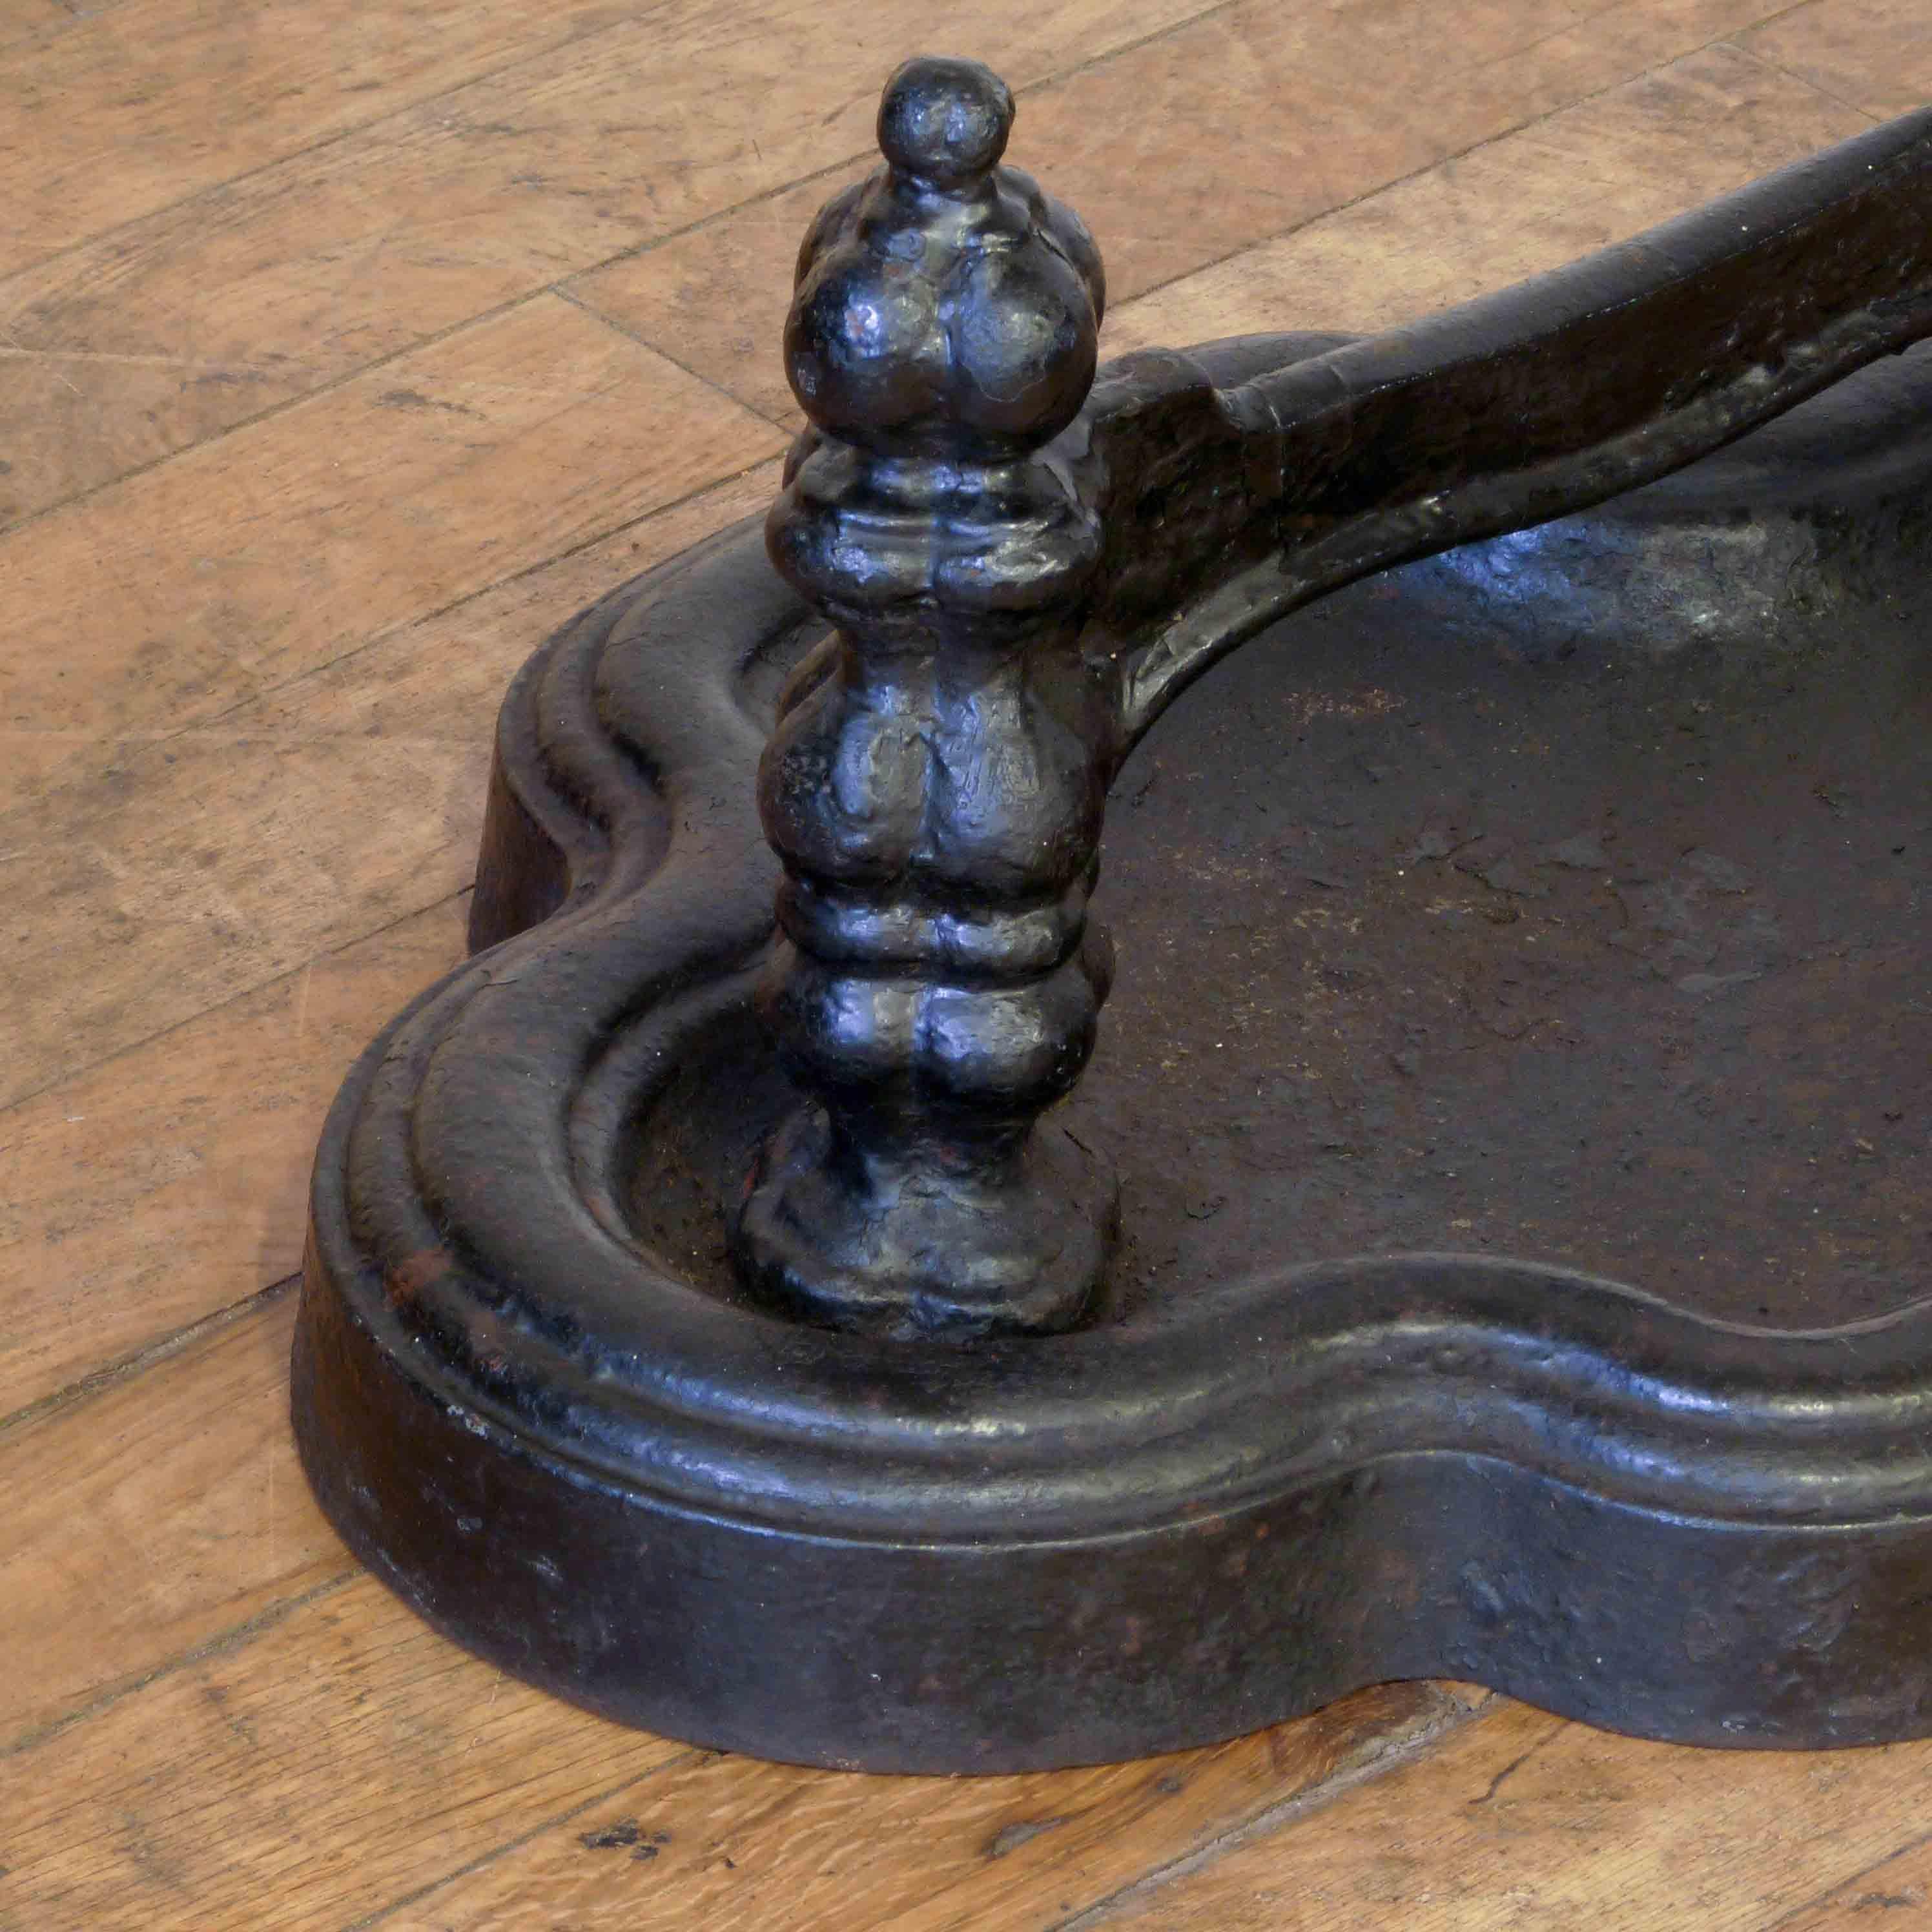 A superb pair of large cast iron boot scrapers in the Victorian style. We assess these to have been made pre second world war to accommodate a grand Victorian entrance. They are well cast and very heavy. Condition is excellent, cleaned and ready for